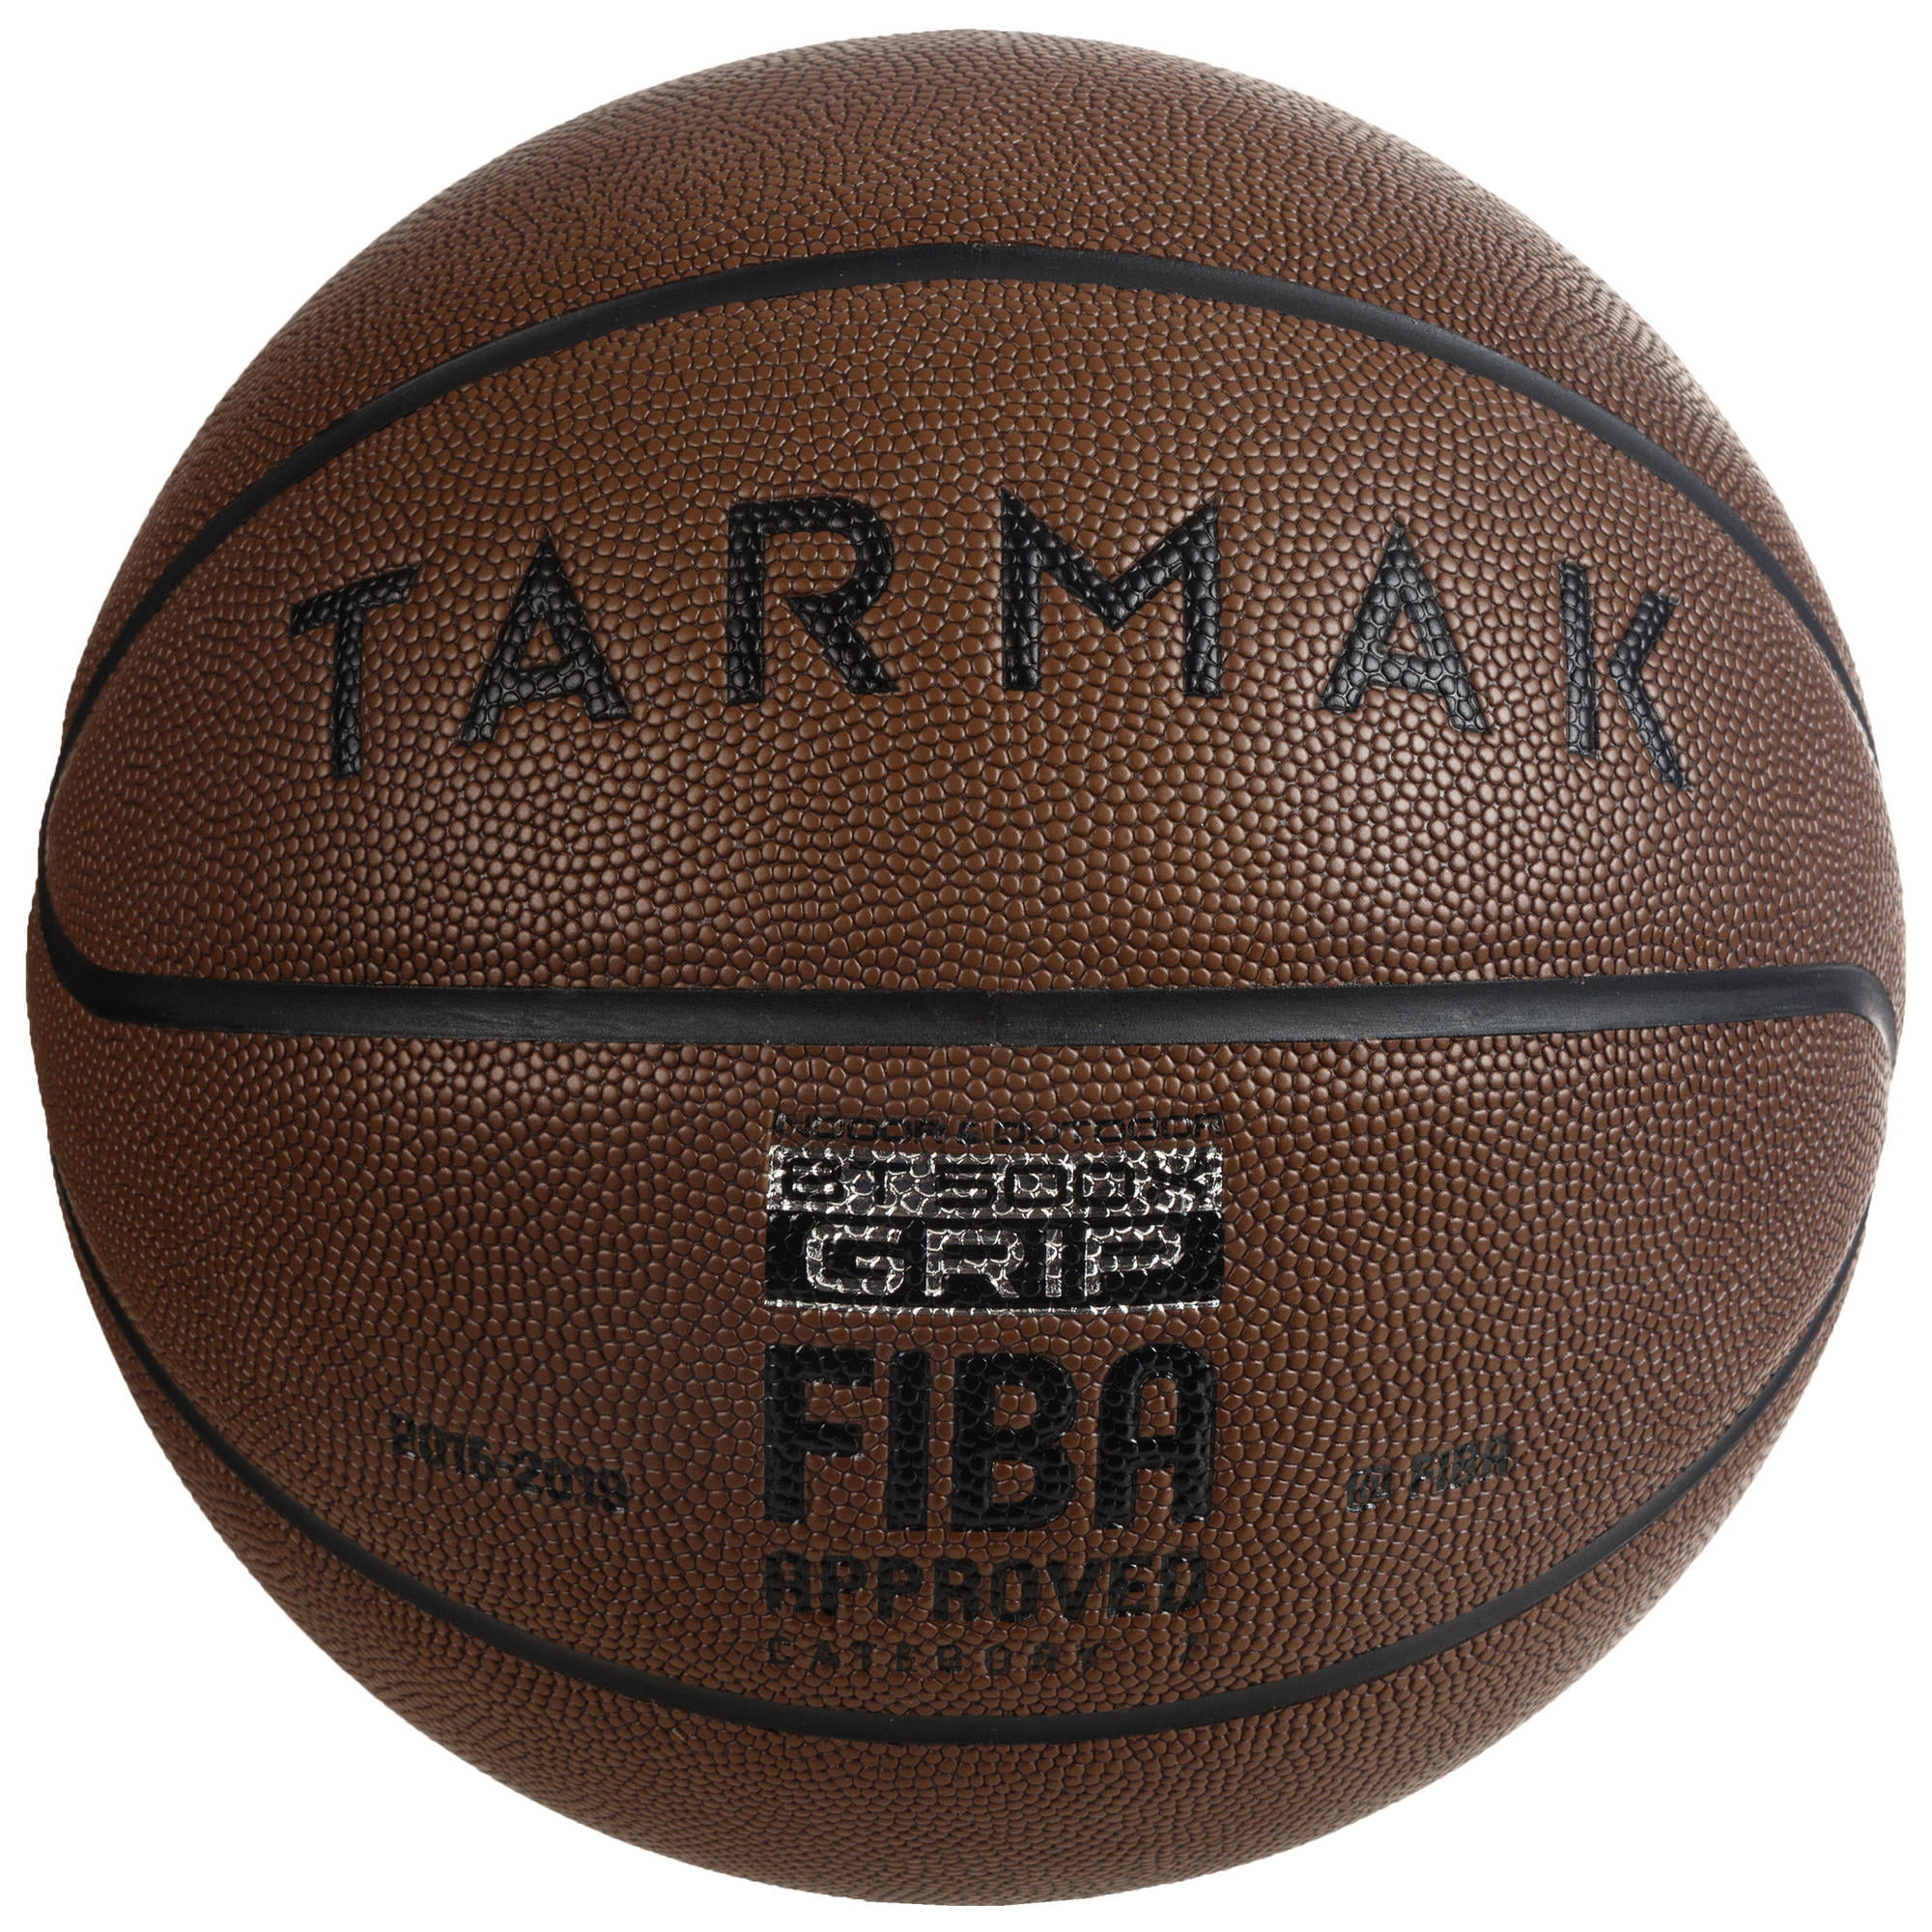 Size 7 Baden Basketball Leather Ball Equalizer Indoor/Outdoor 